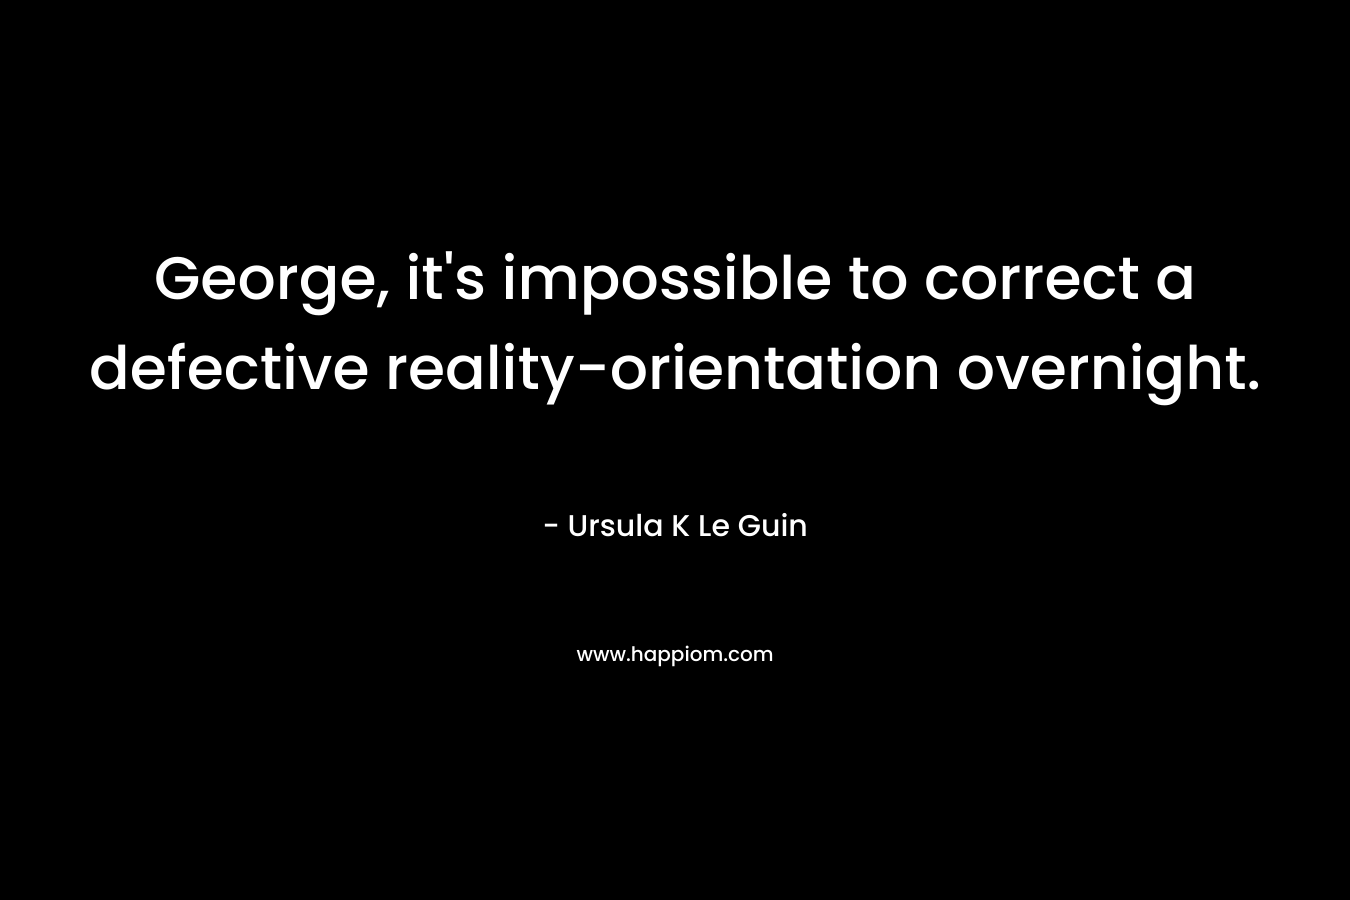 George, it's impossible to correct a defective reality-orientation overnight.